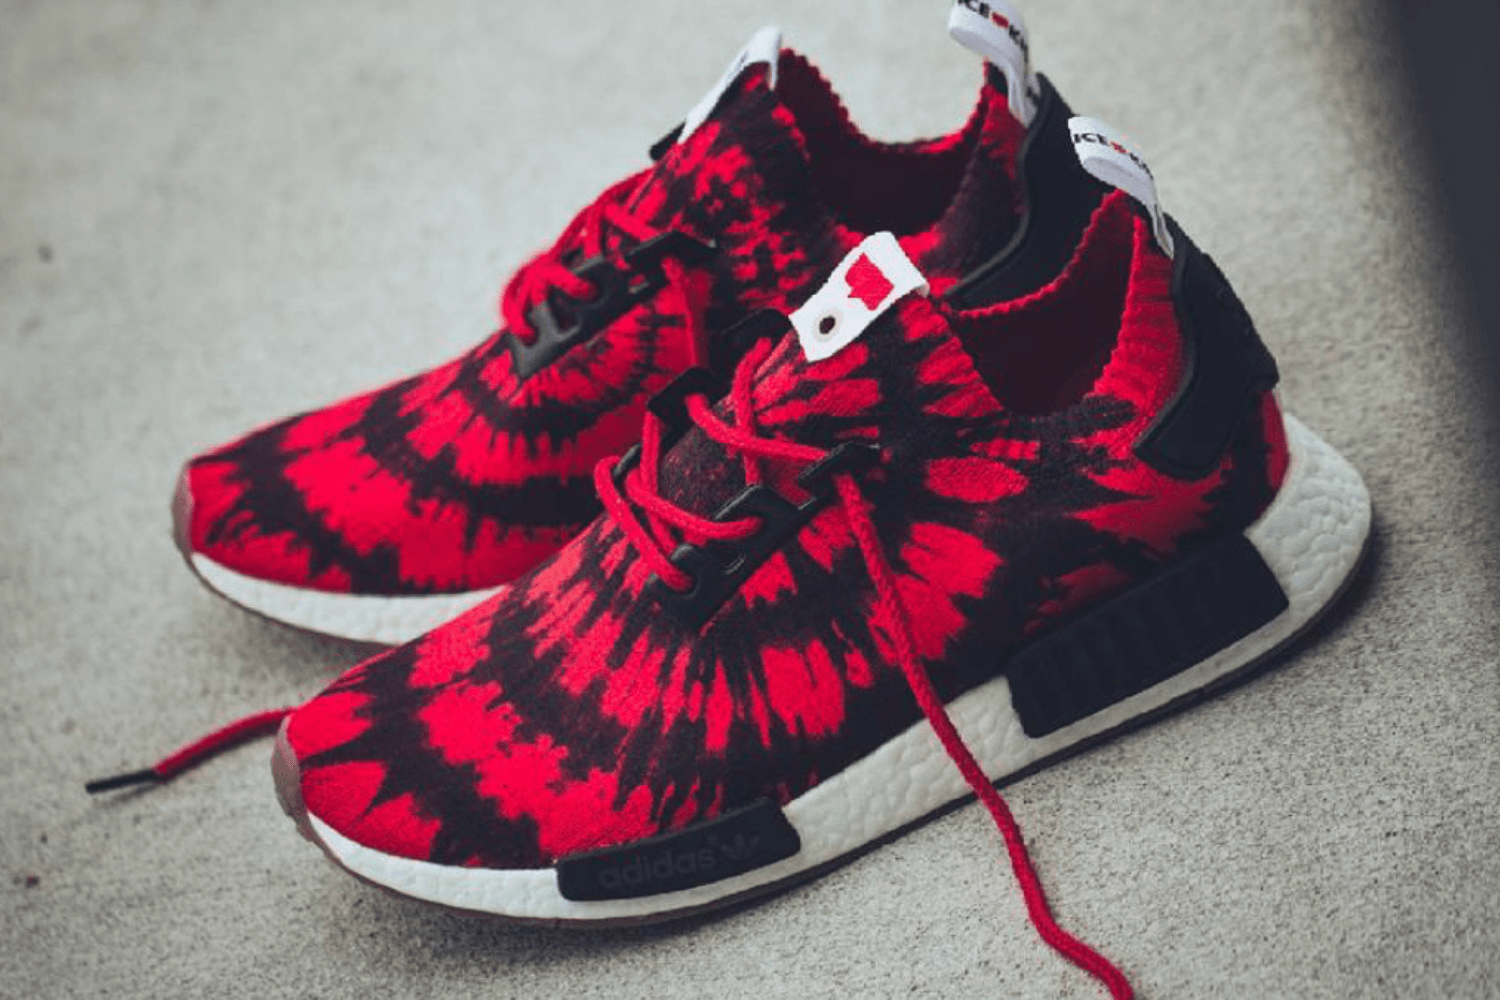 Counter the Hype with our Top 10 adidas NMDs at StockX